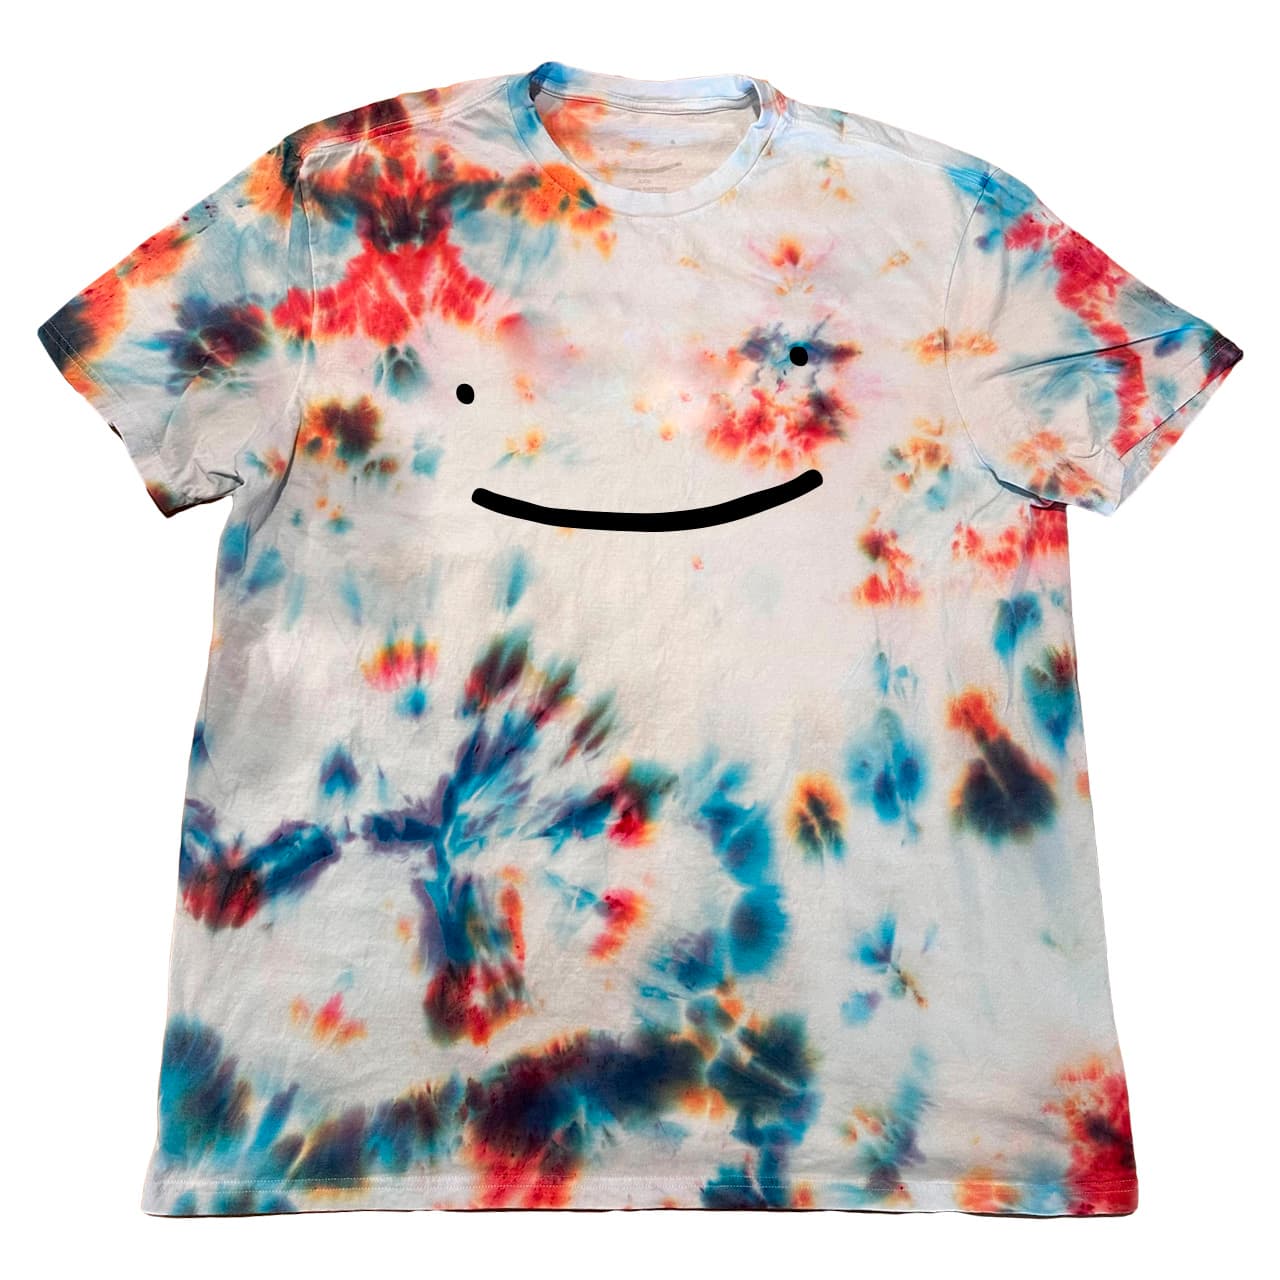 Dream Team Red, White, and You Tie Dye Kit